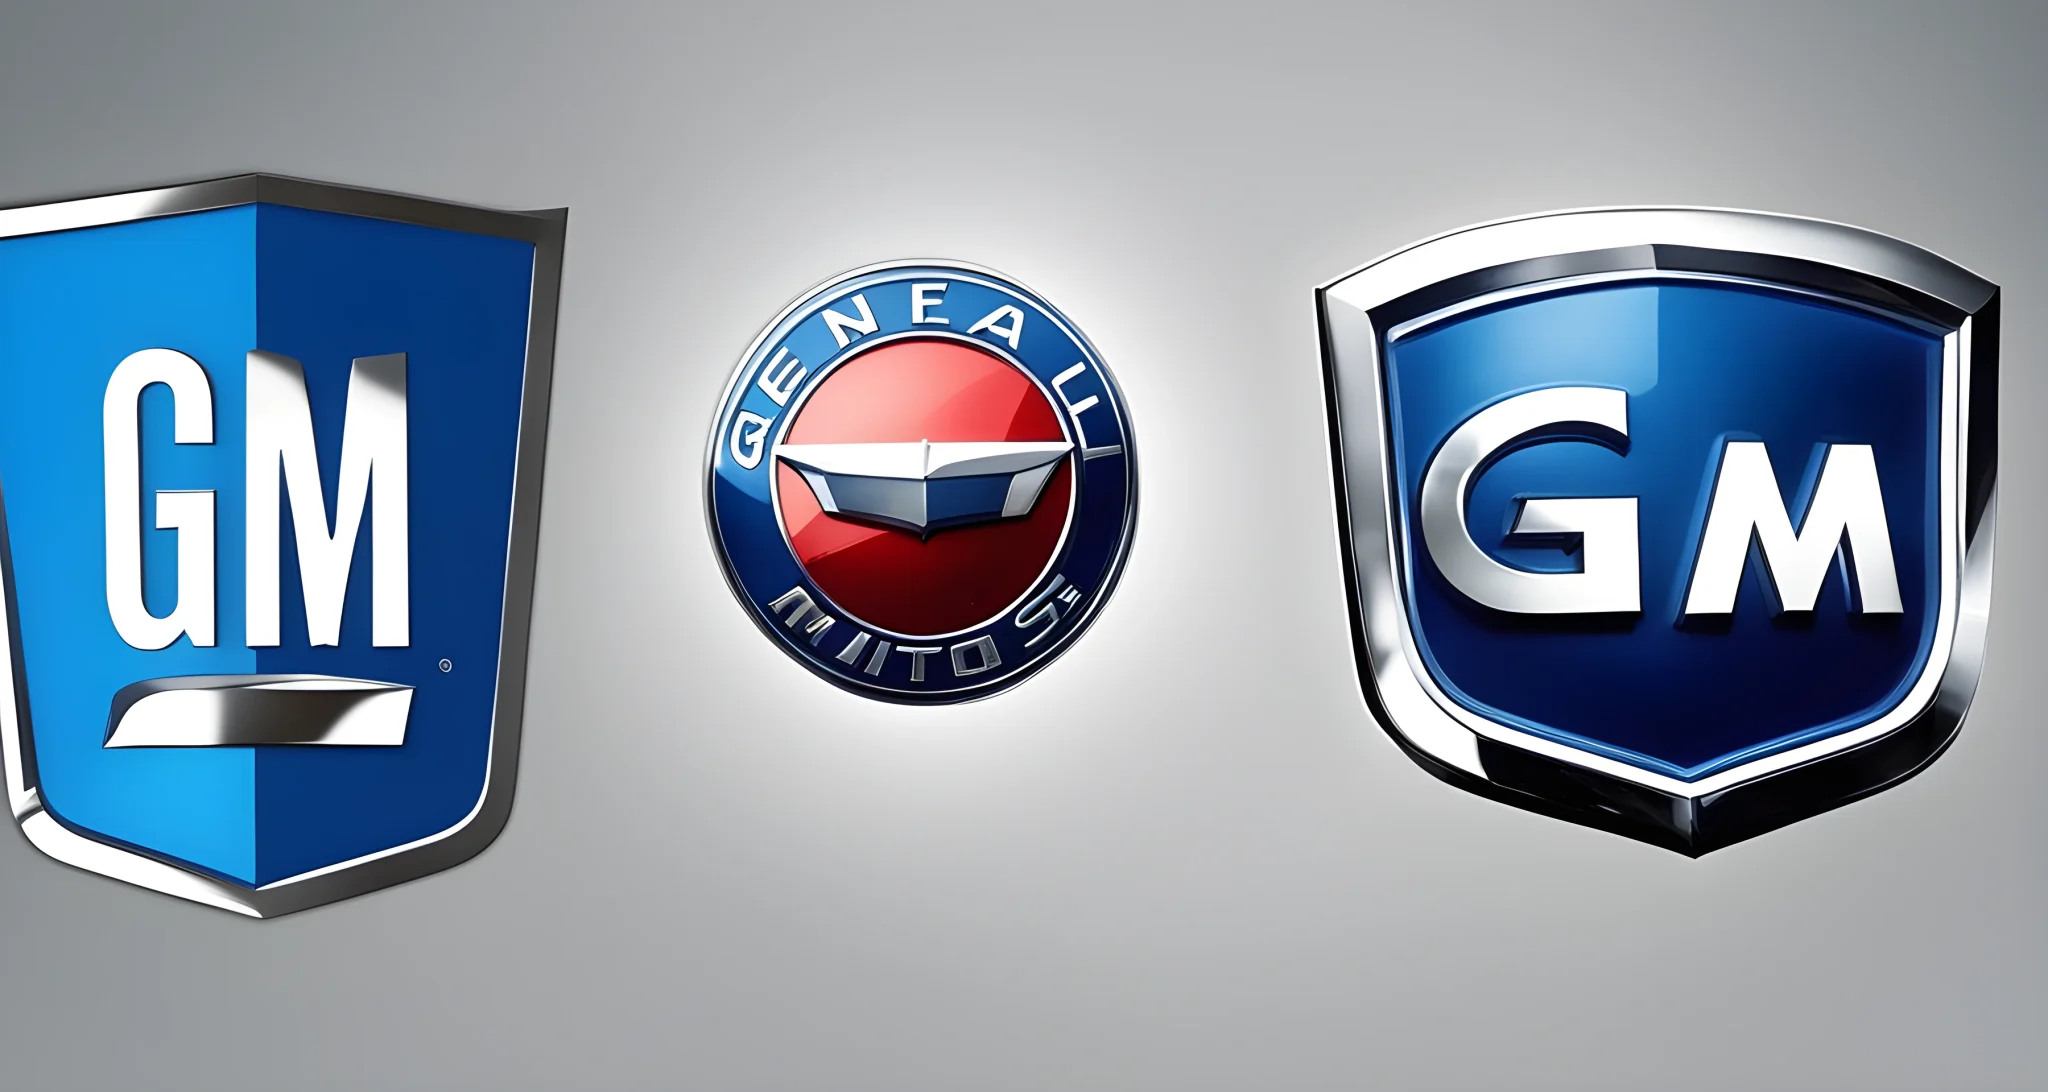 The image shows the logos of General Motors (GM) and ALGOLiON.